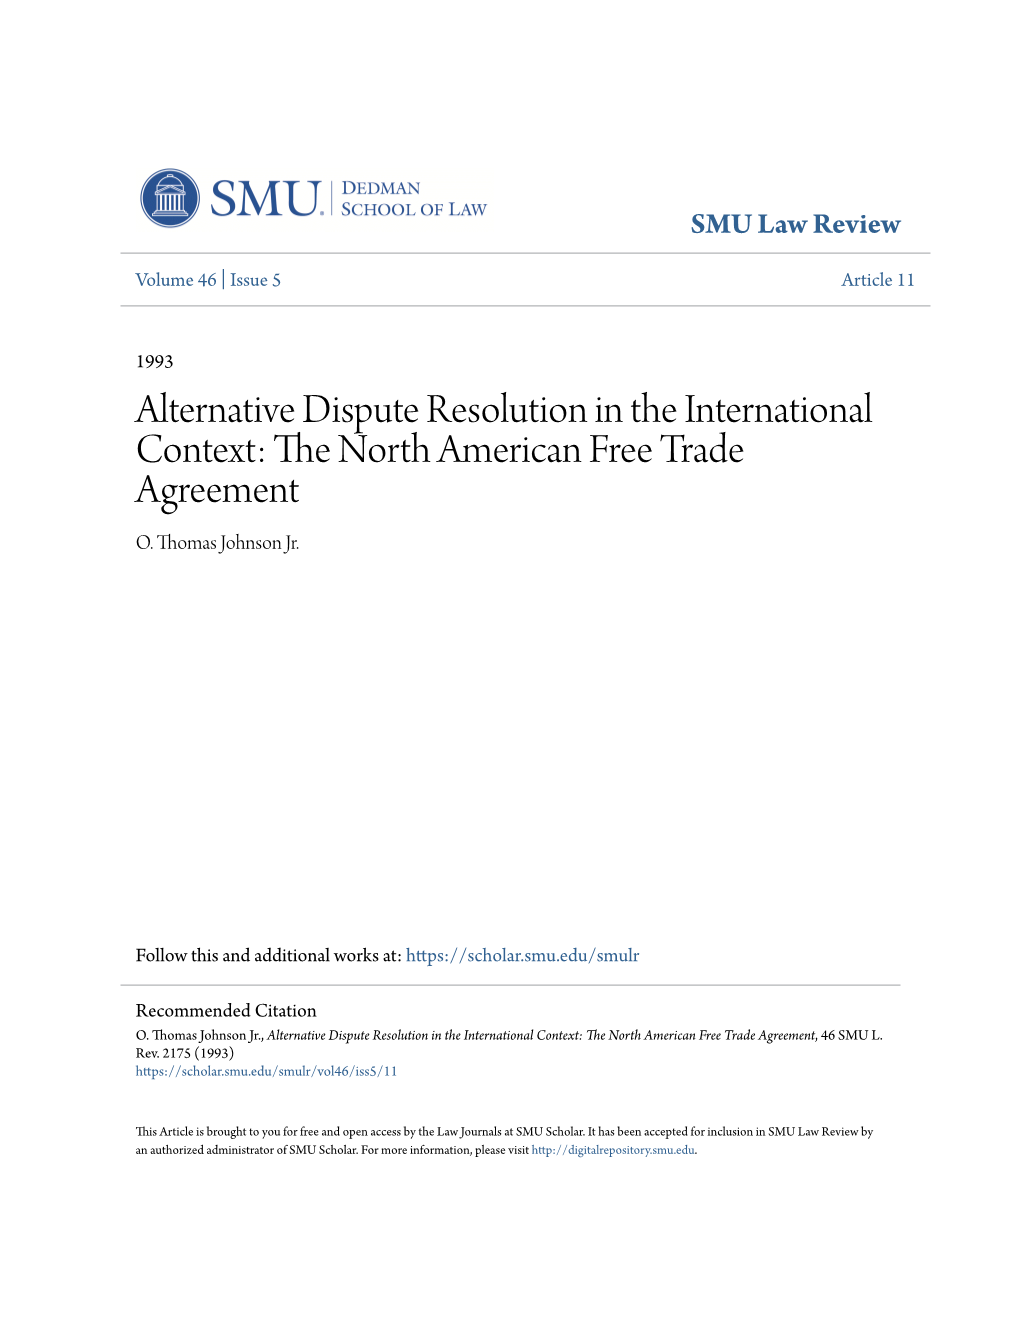 Alternative Dispute Resolution in the International Context: the Orn Th American Free Trade Agreement O